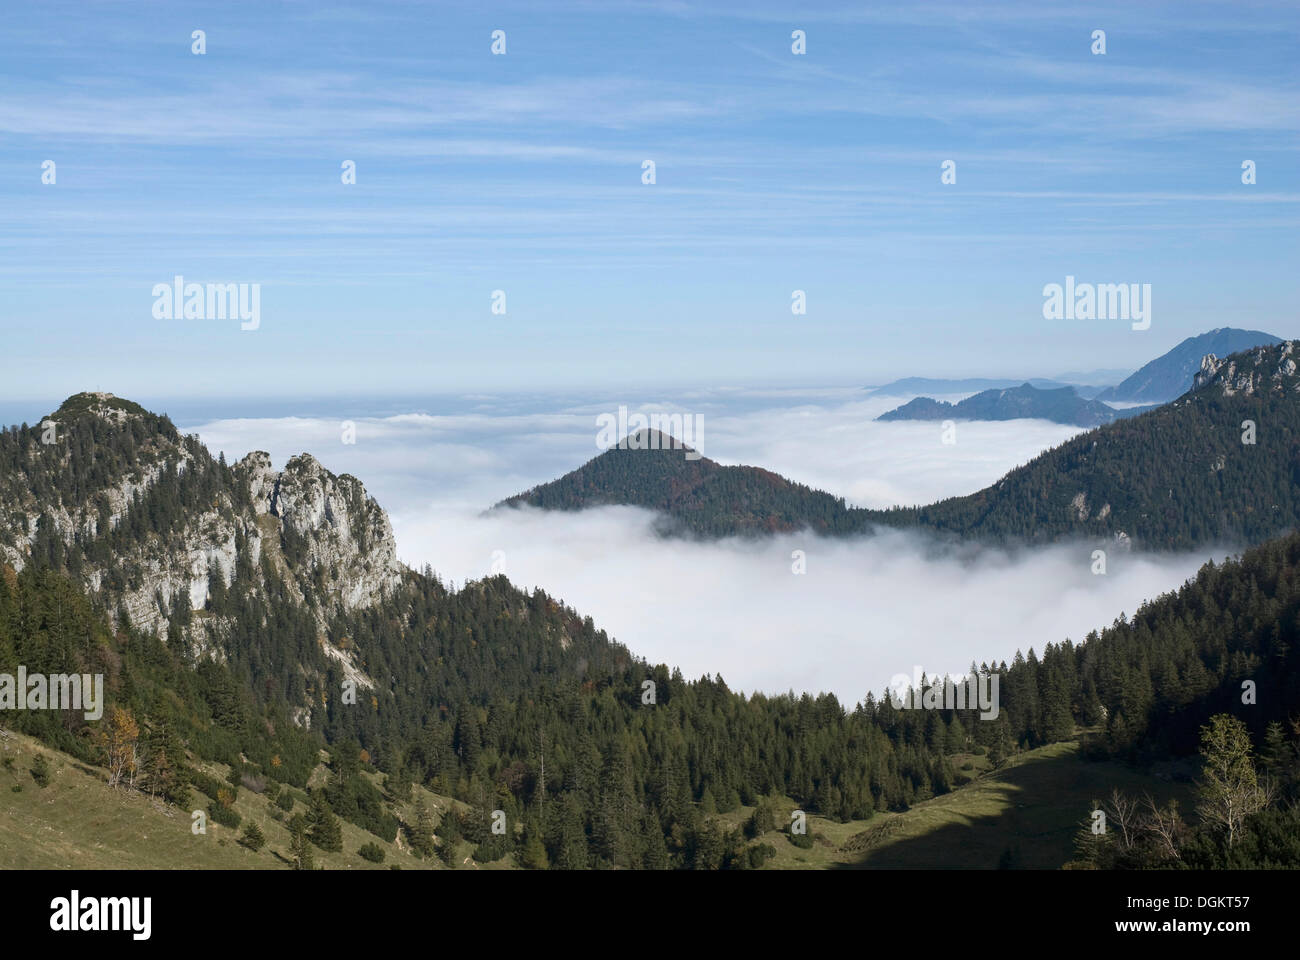 View of Kampenwand mountain, view from near the summit station looking towards the fog-shrouded Alps, Chiemgau area Stock Photo